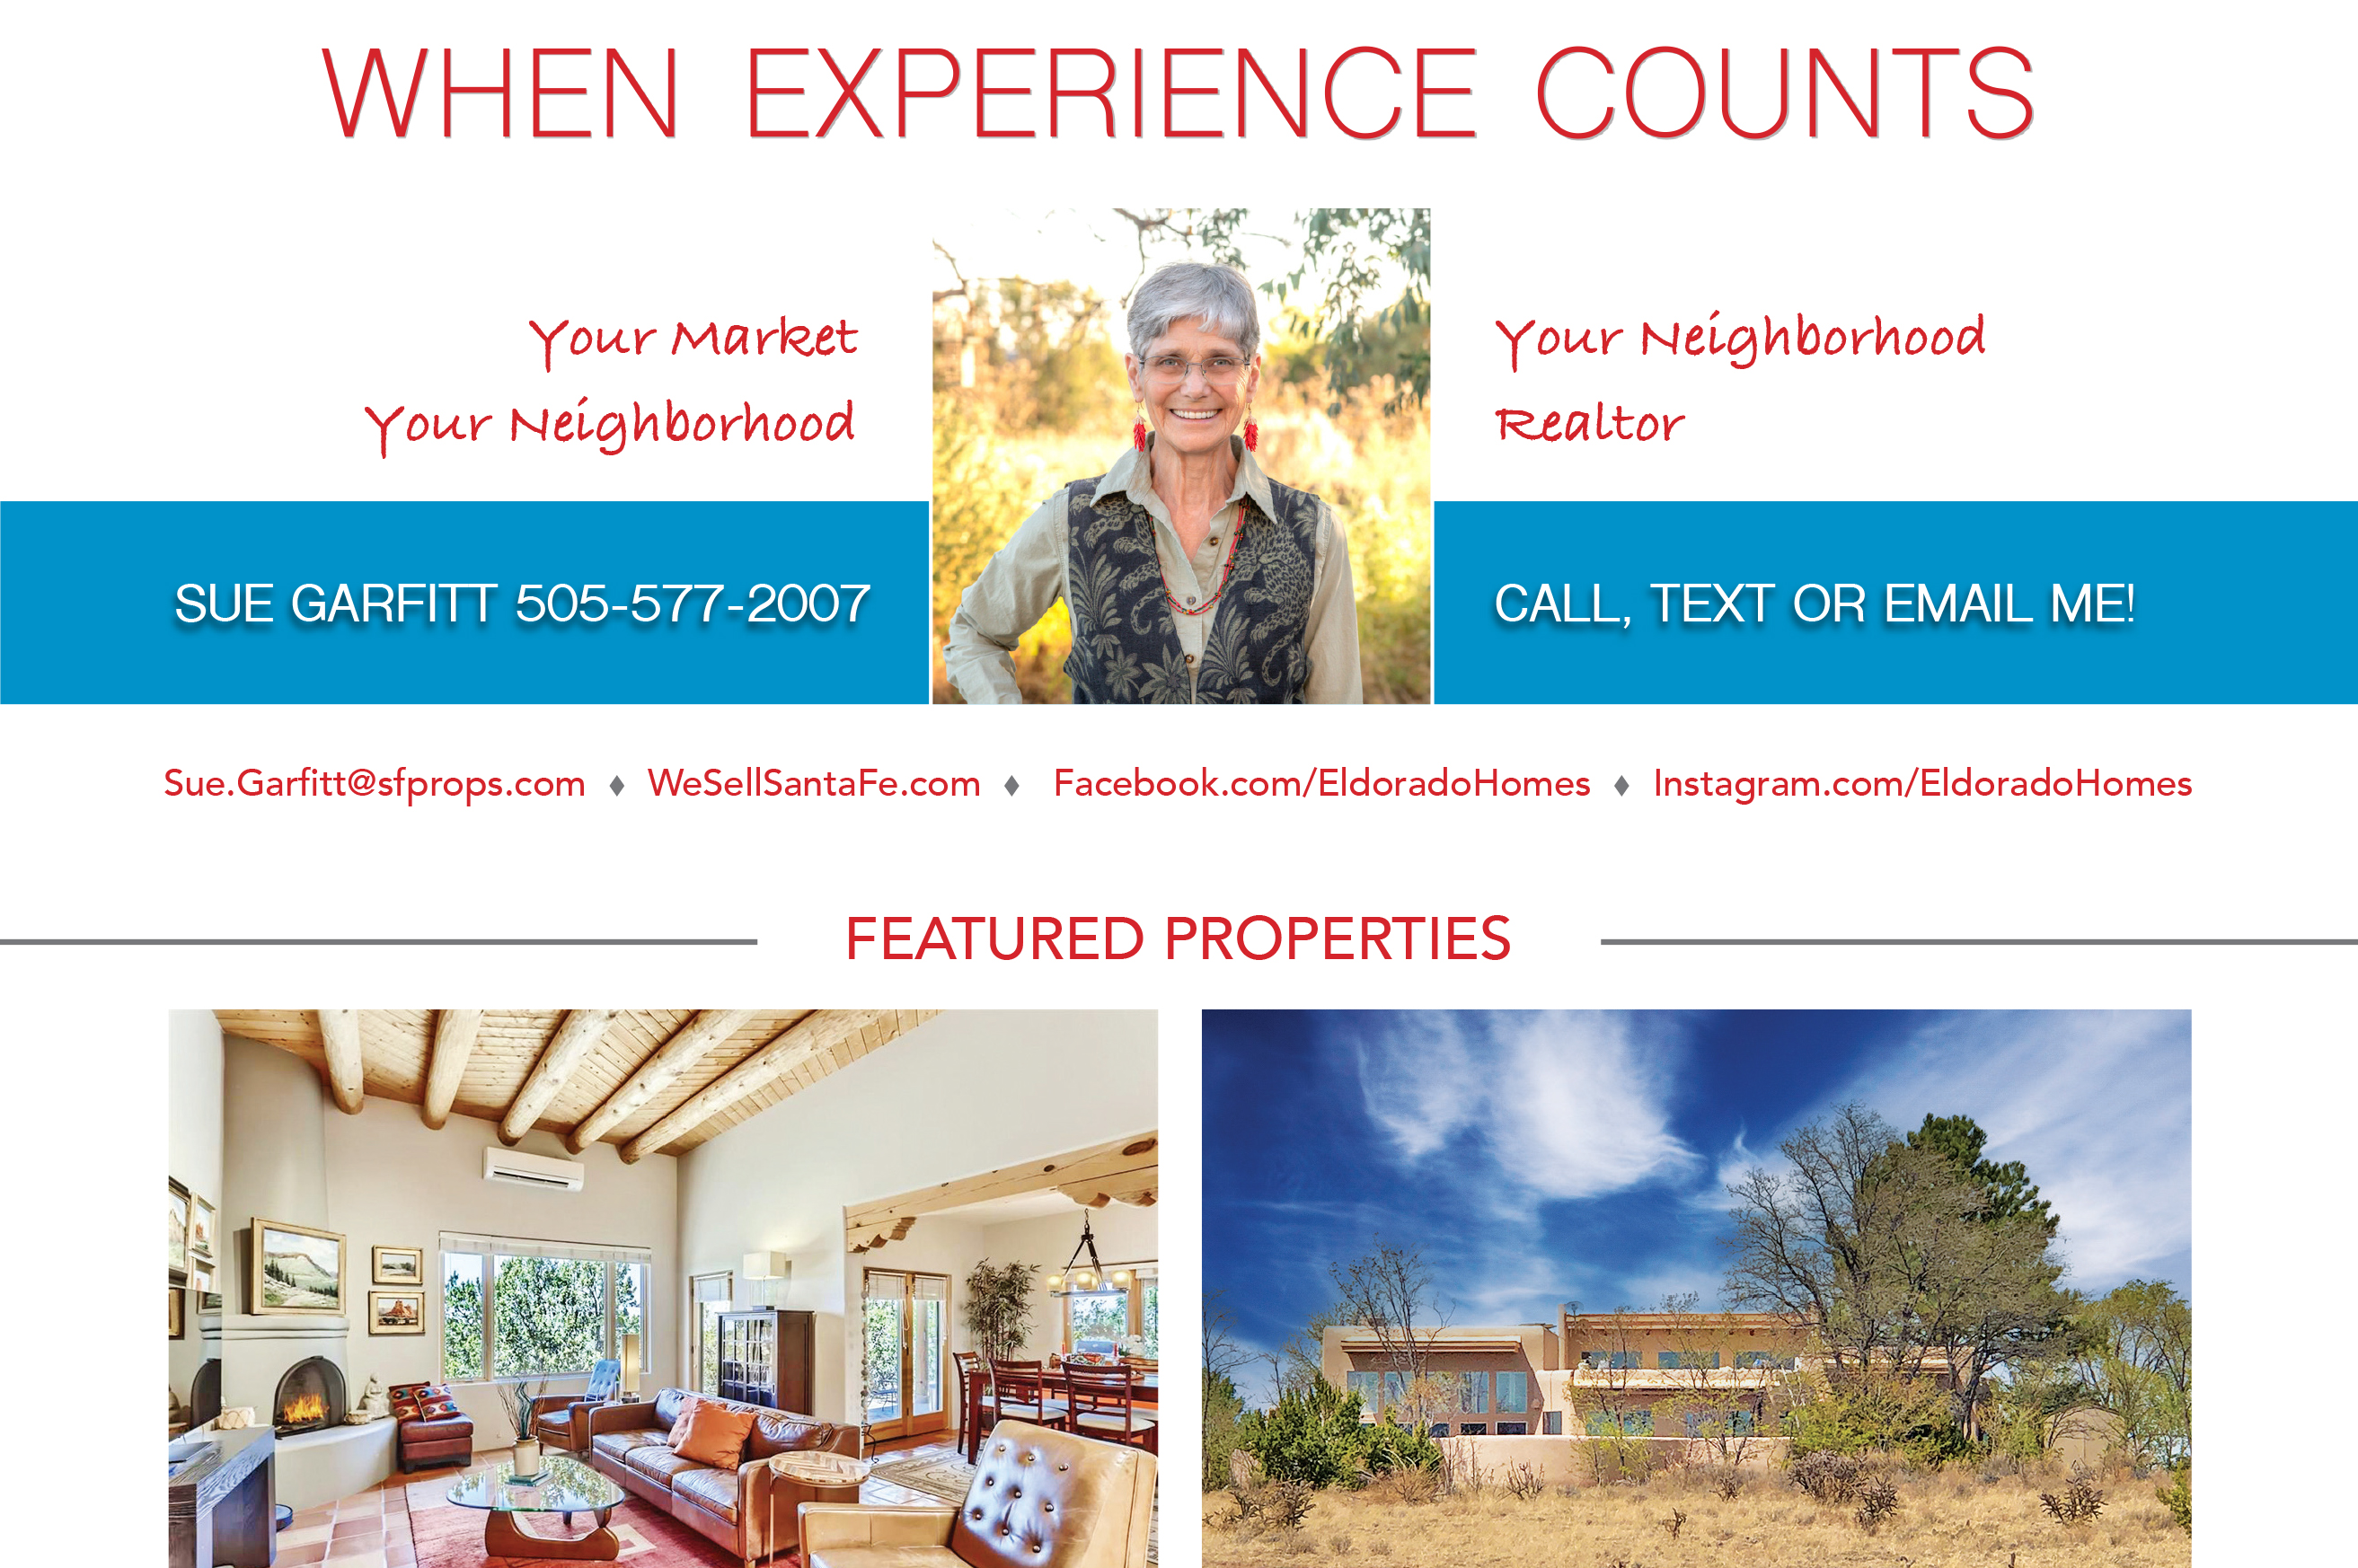 Did you see my ad in the June issue of Eldorado Living? 